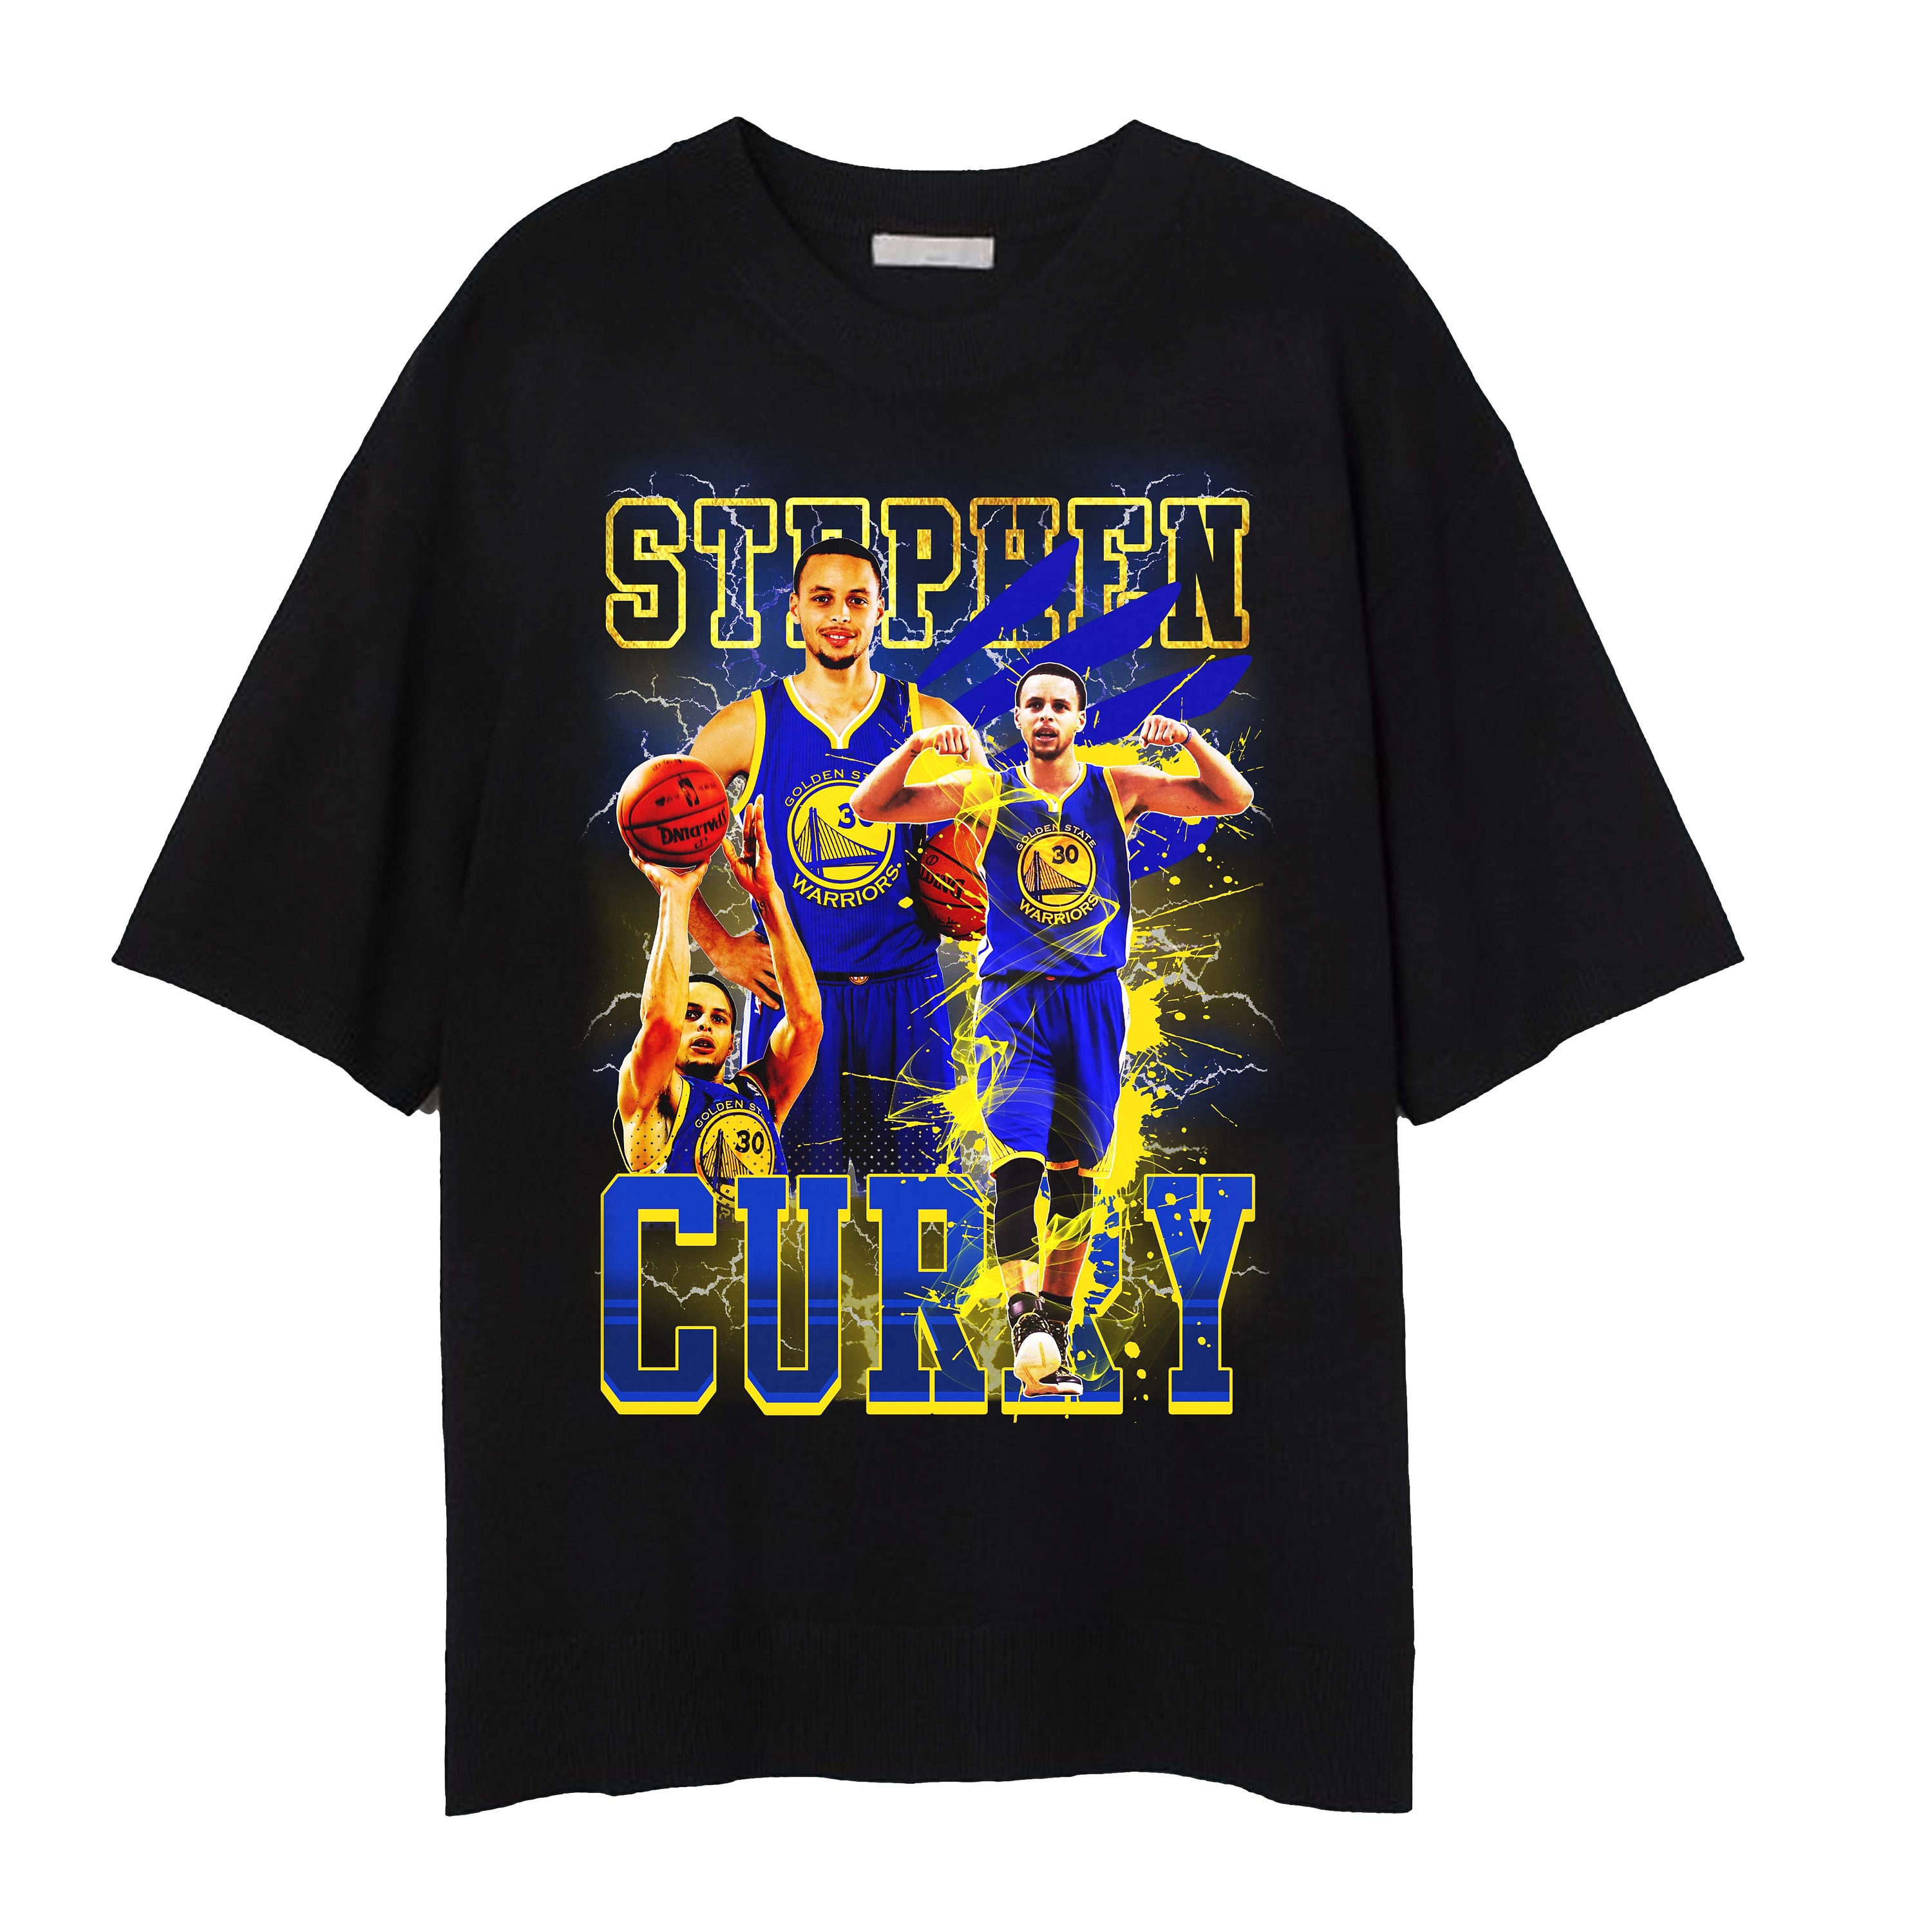 STEPHEN CURRY T Shirt Design PNG Instant Download - Etsy